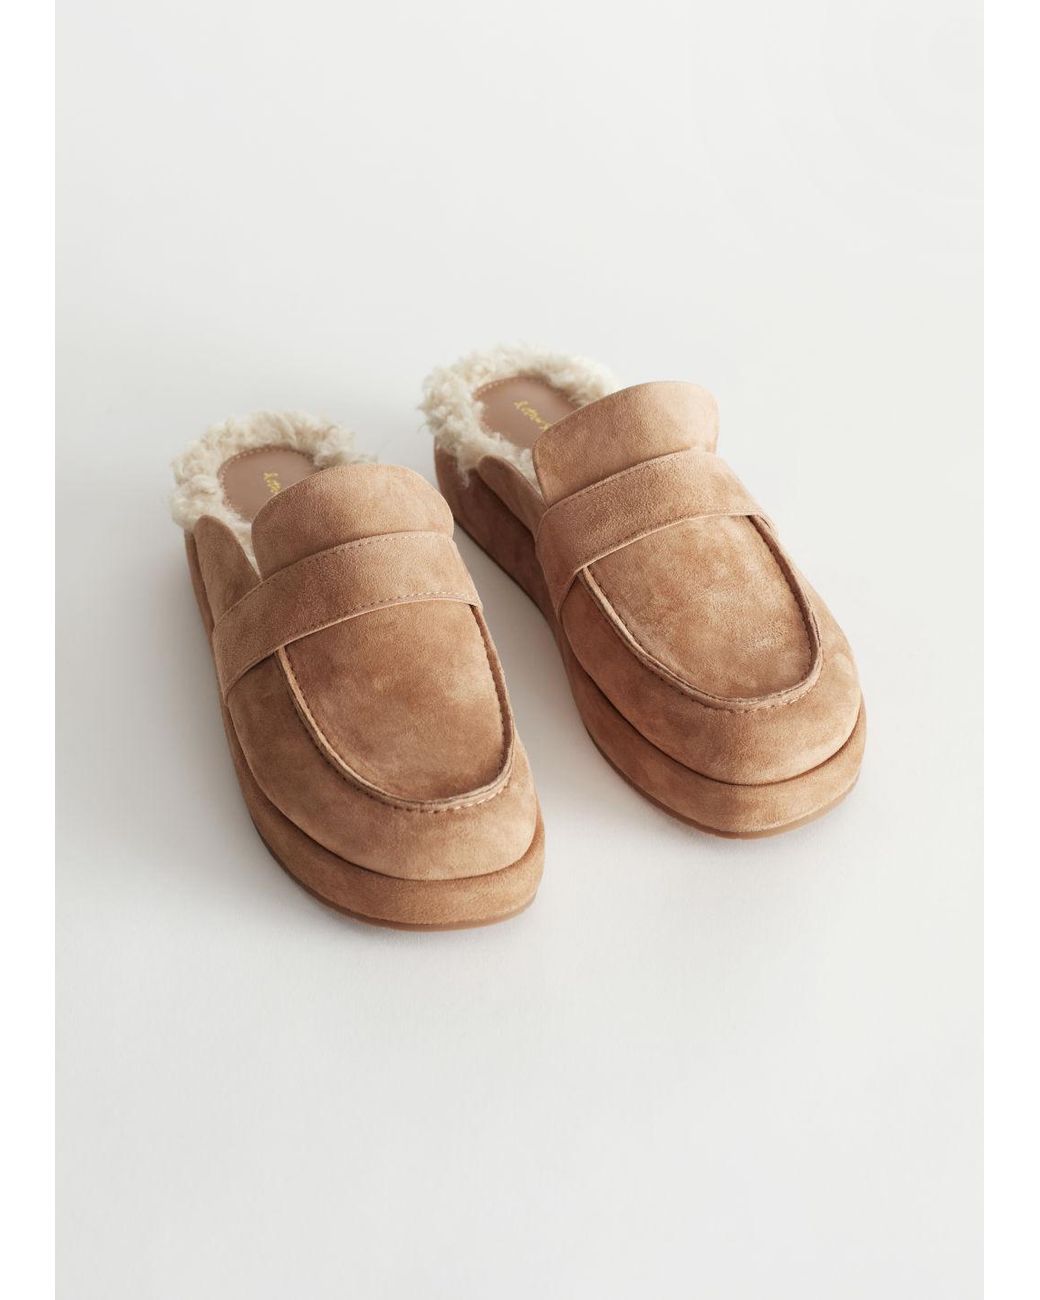 & Other Stories Suede Slip-on Loafers in Natural | Lyst